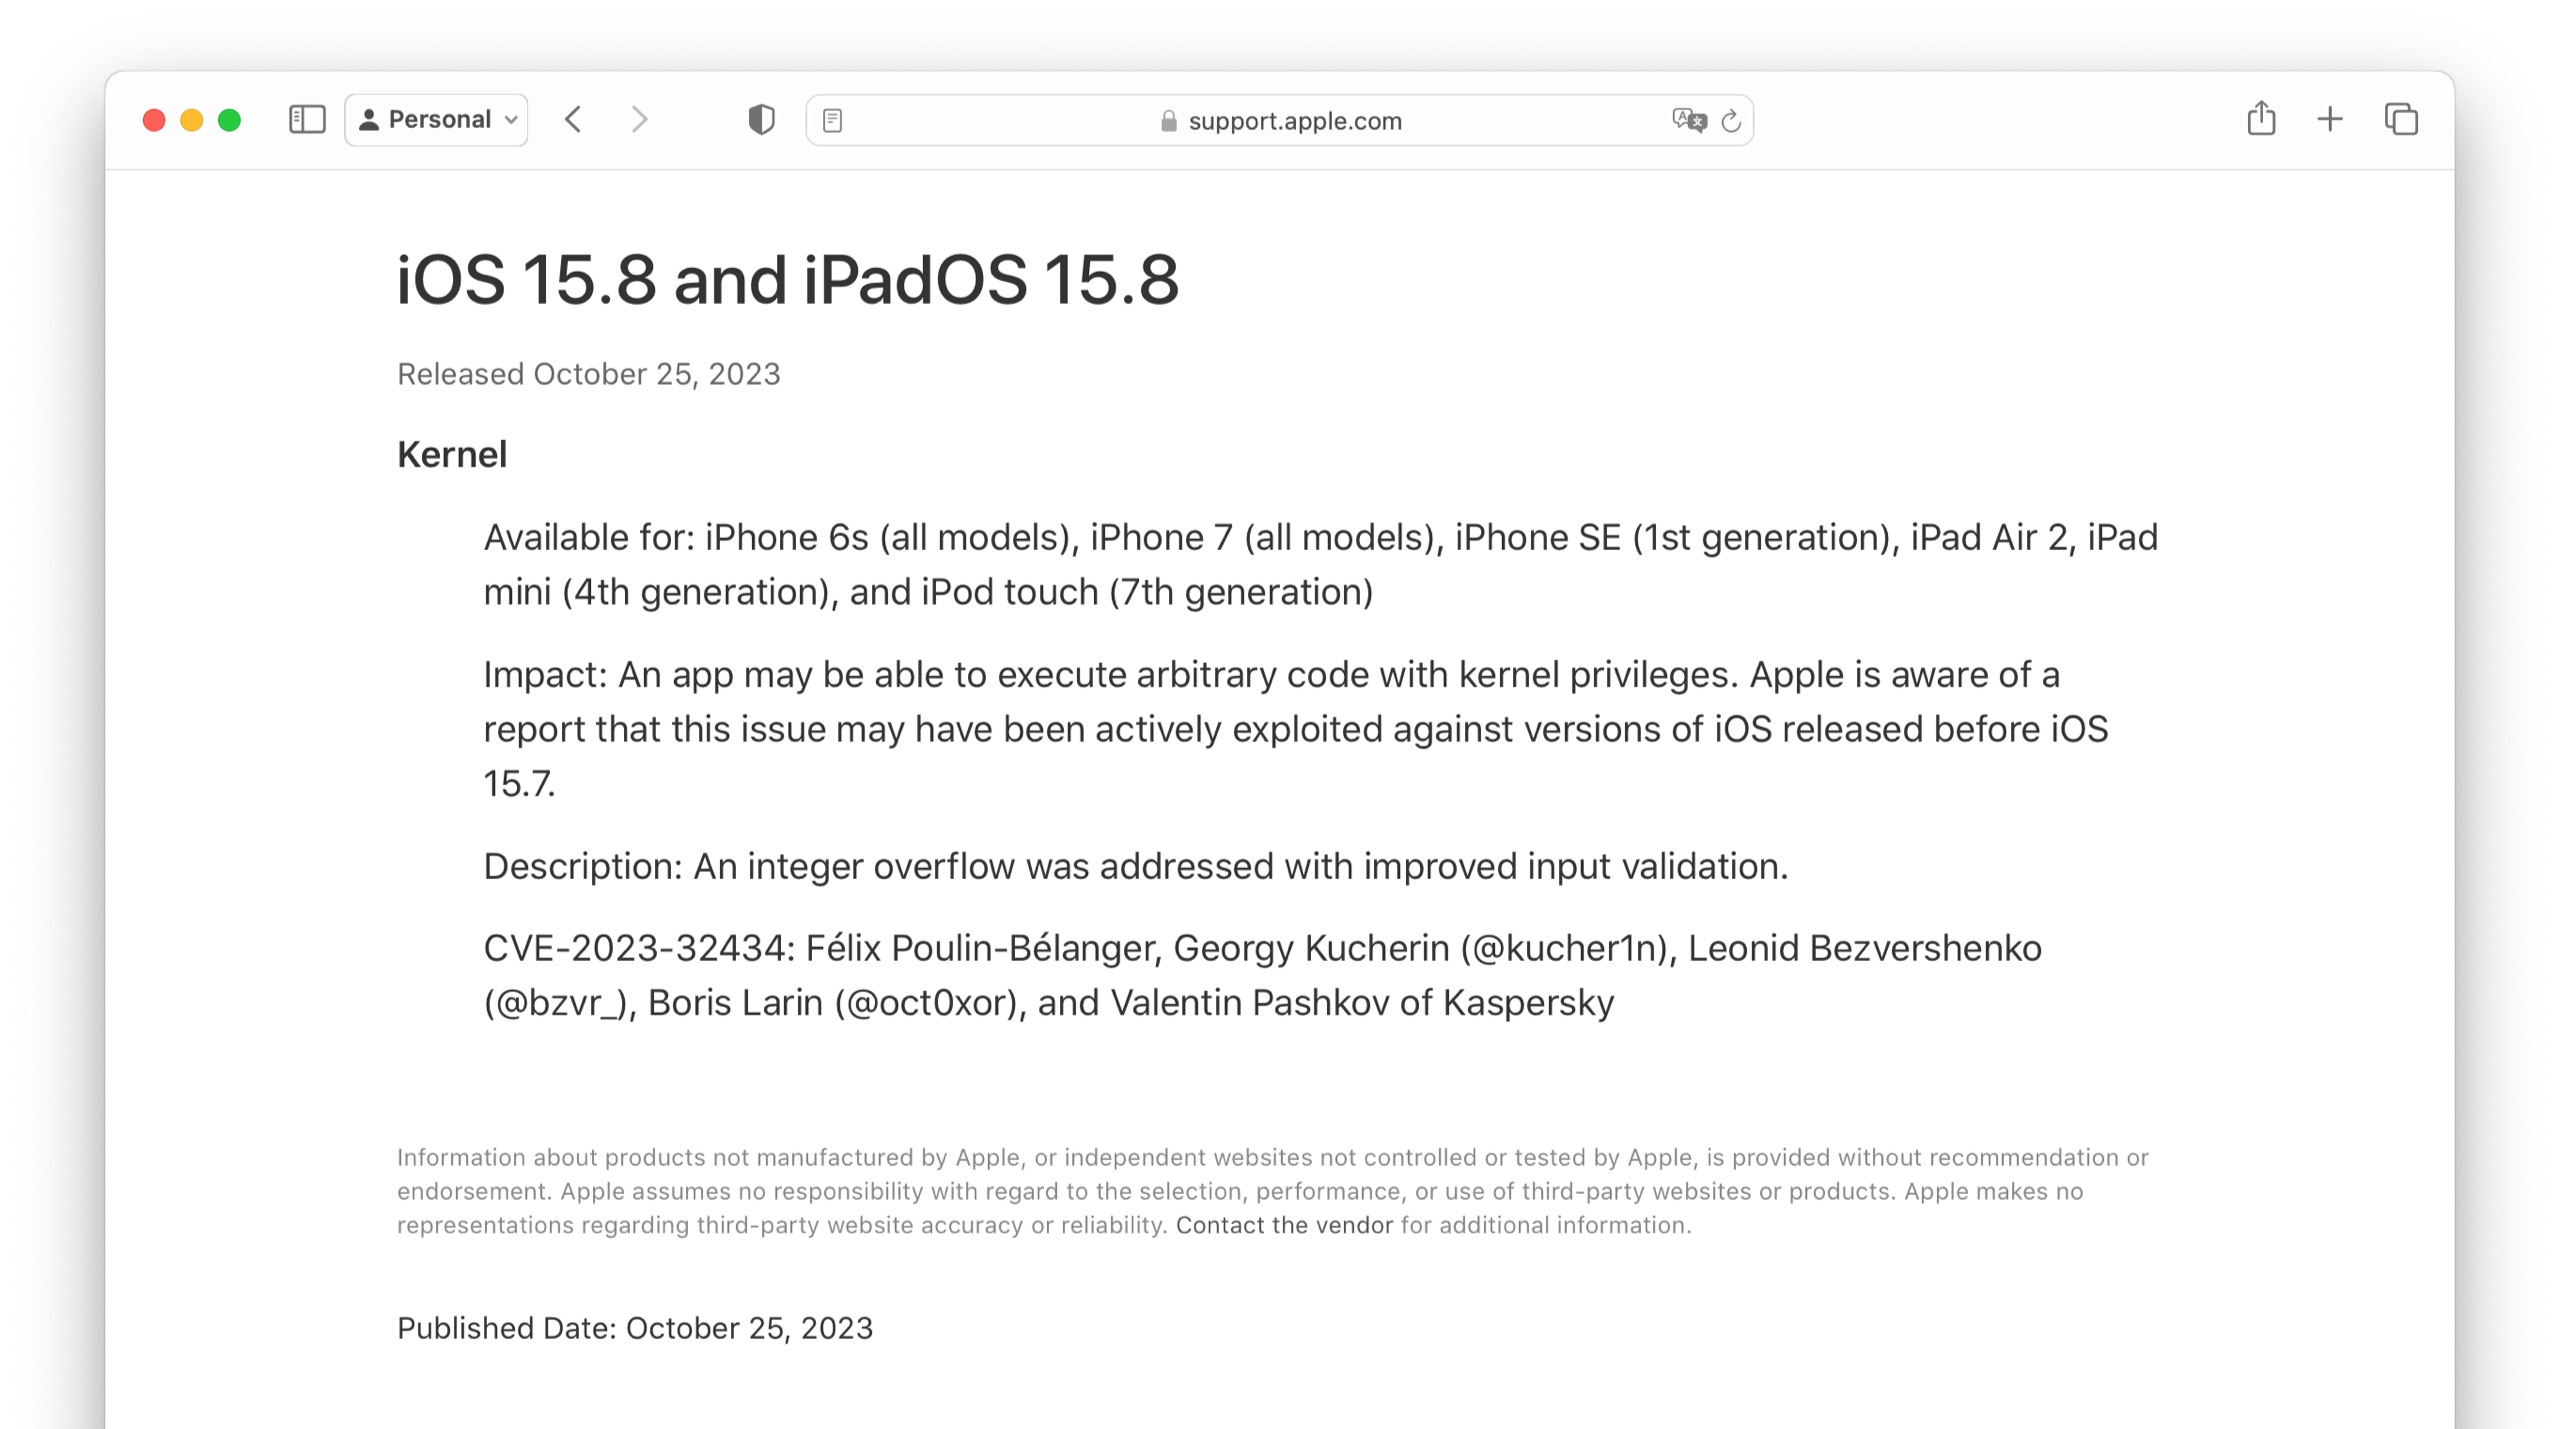 About the security content of iOS 15.8 and iPadOS 15.8